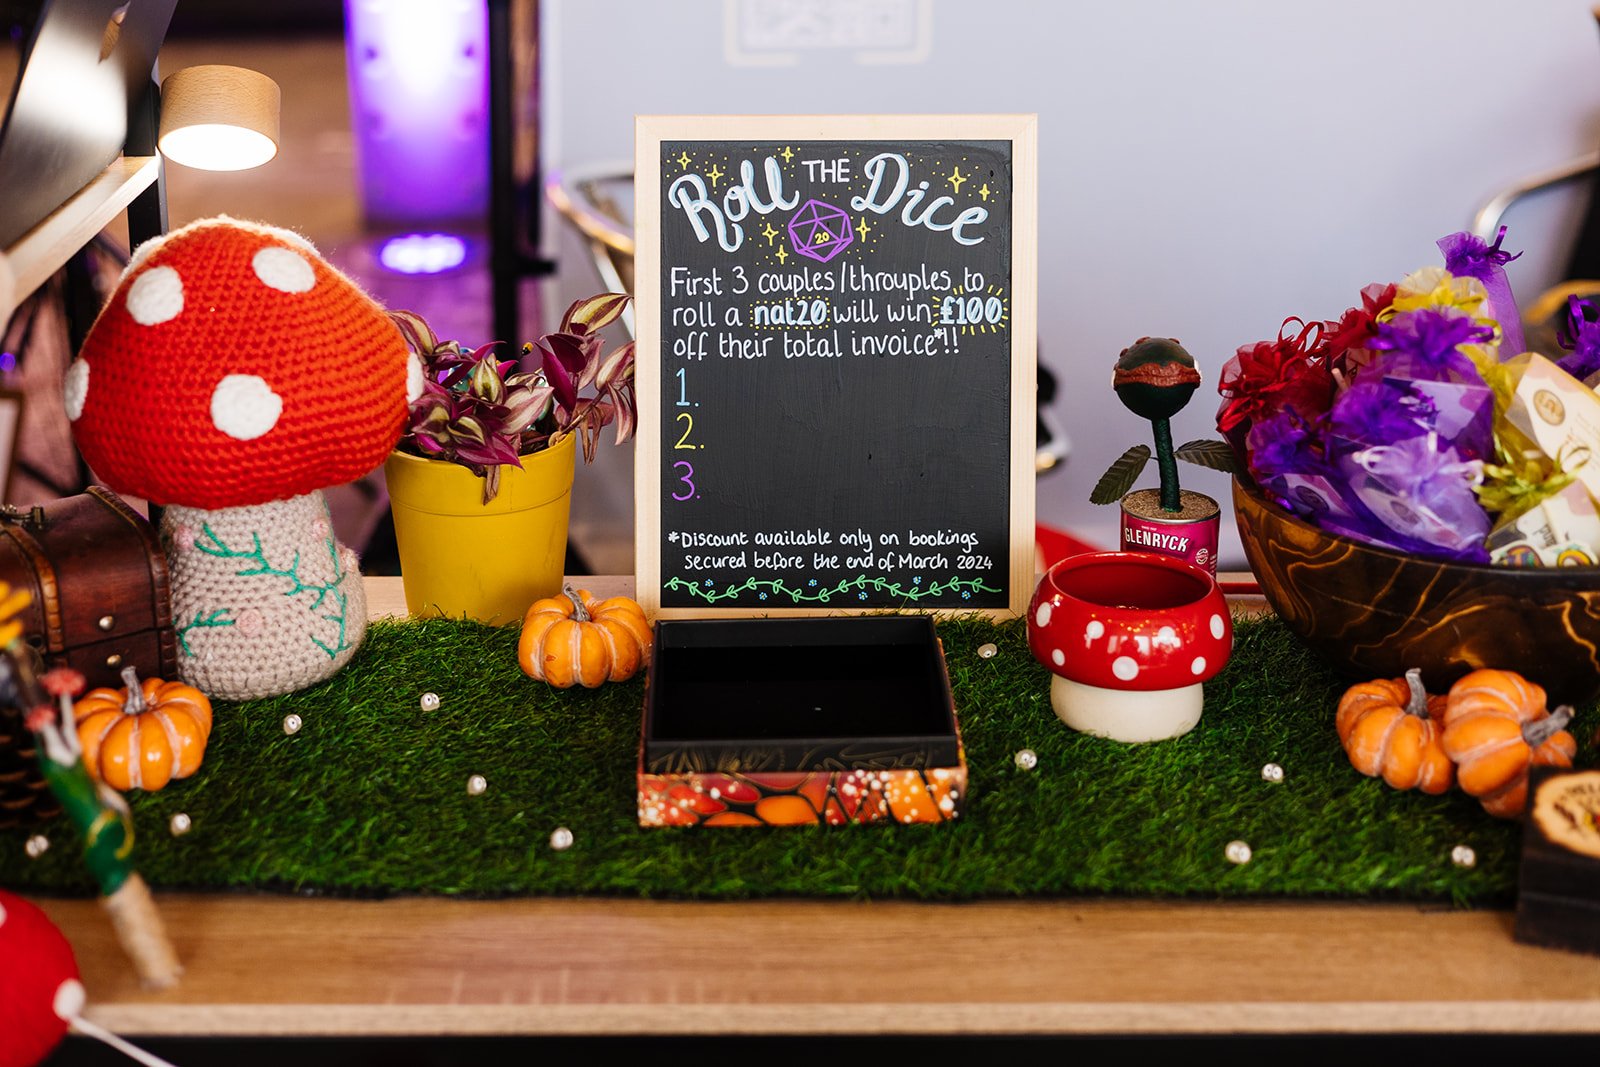  A knitted toadstool on a table that has a sign which says ‘Roll the dice’ 